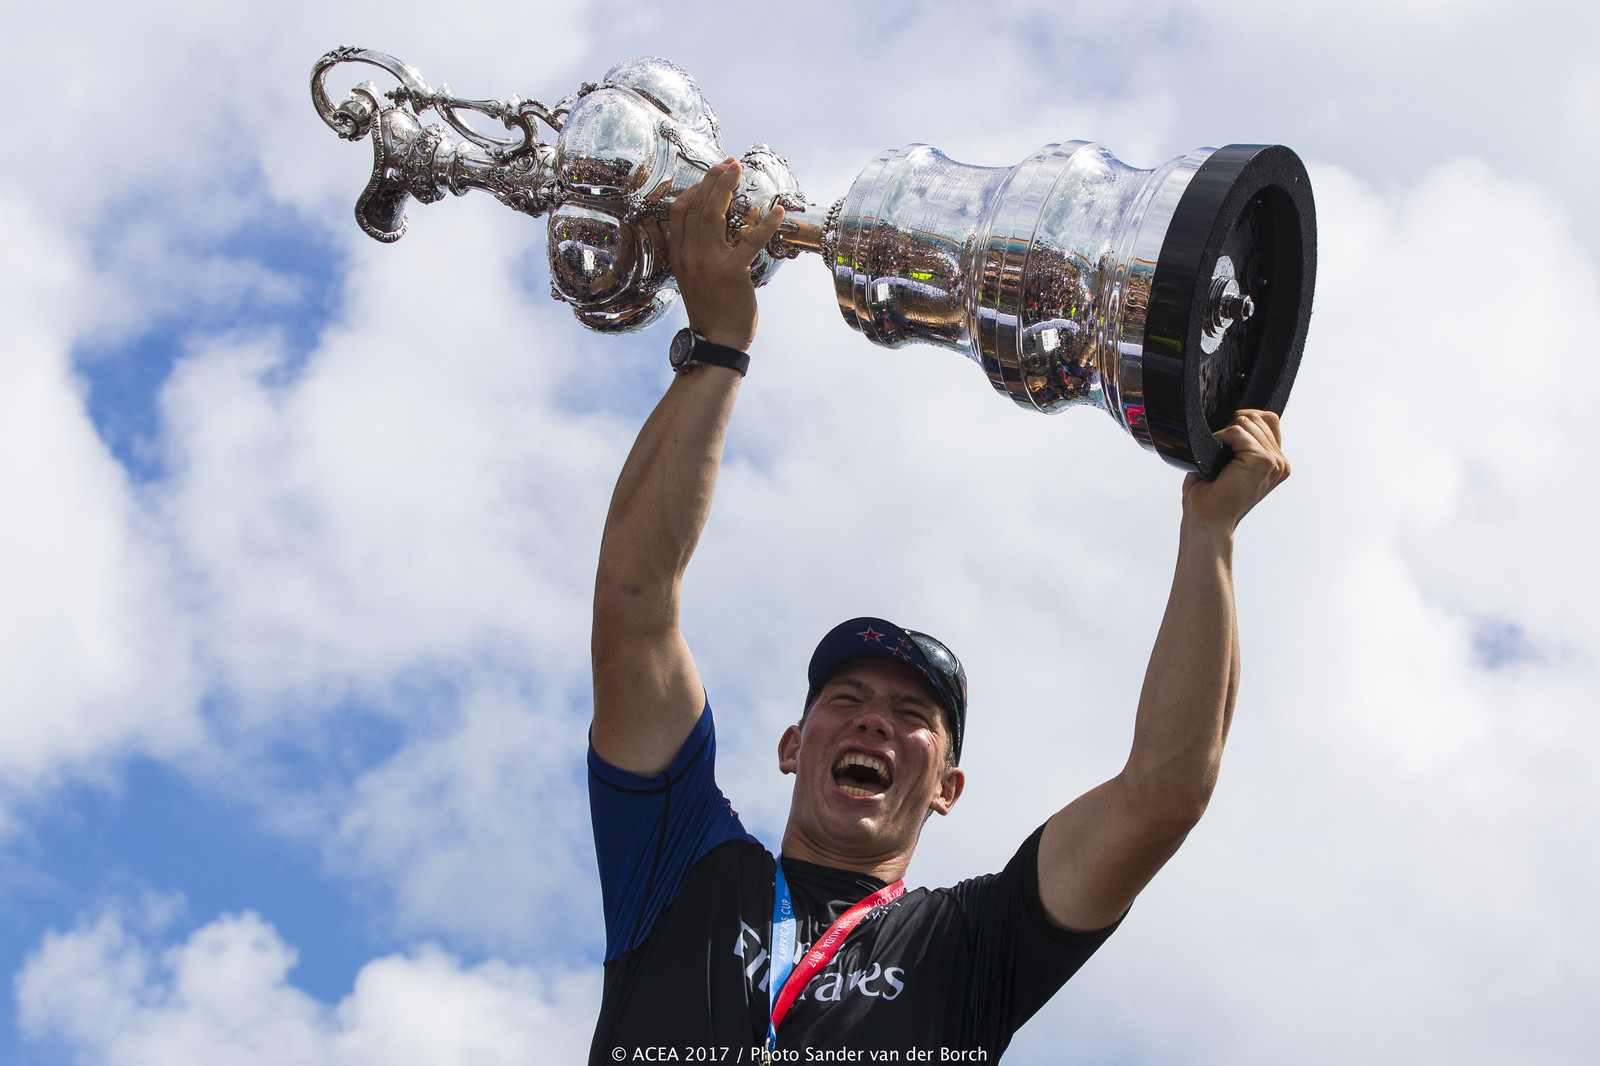 25/06/2017 - Bermuda (BDA) - 35th America's Cup 2017 - 35th America's Cup Match Presented by Louis Vuitton, Day 5 - Emirates Team New Zealand Prize Giving